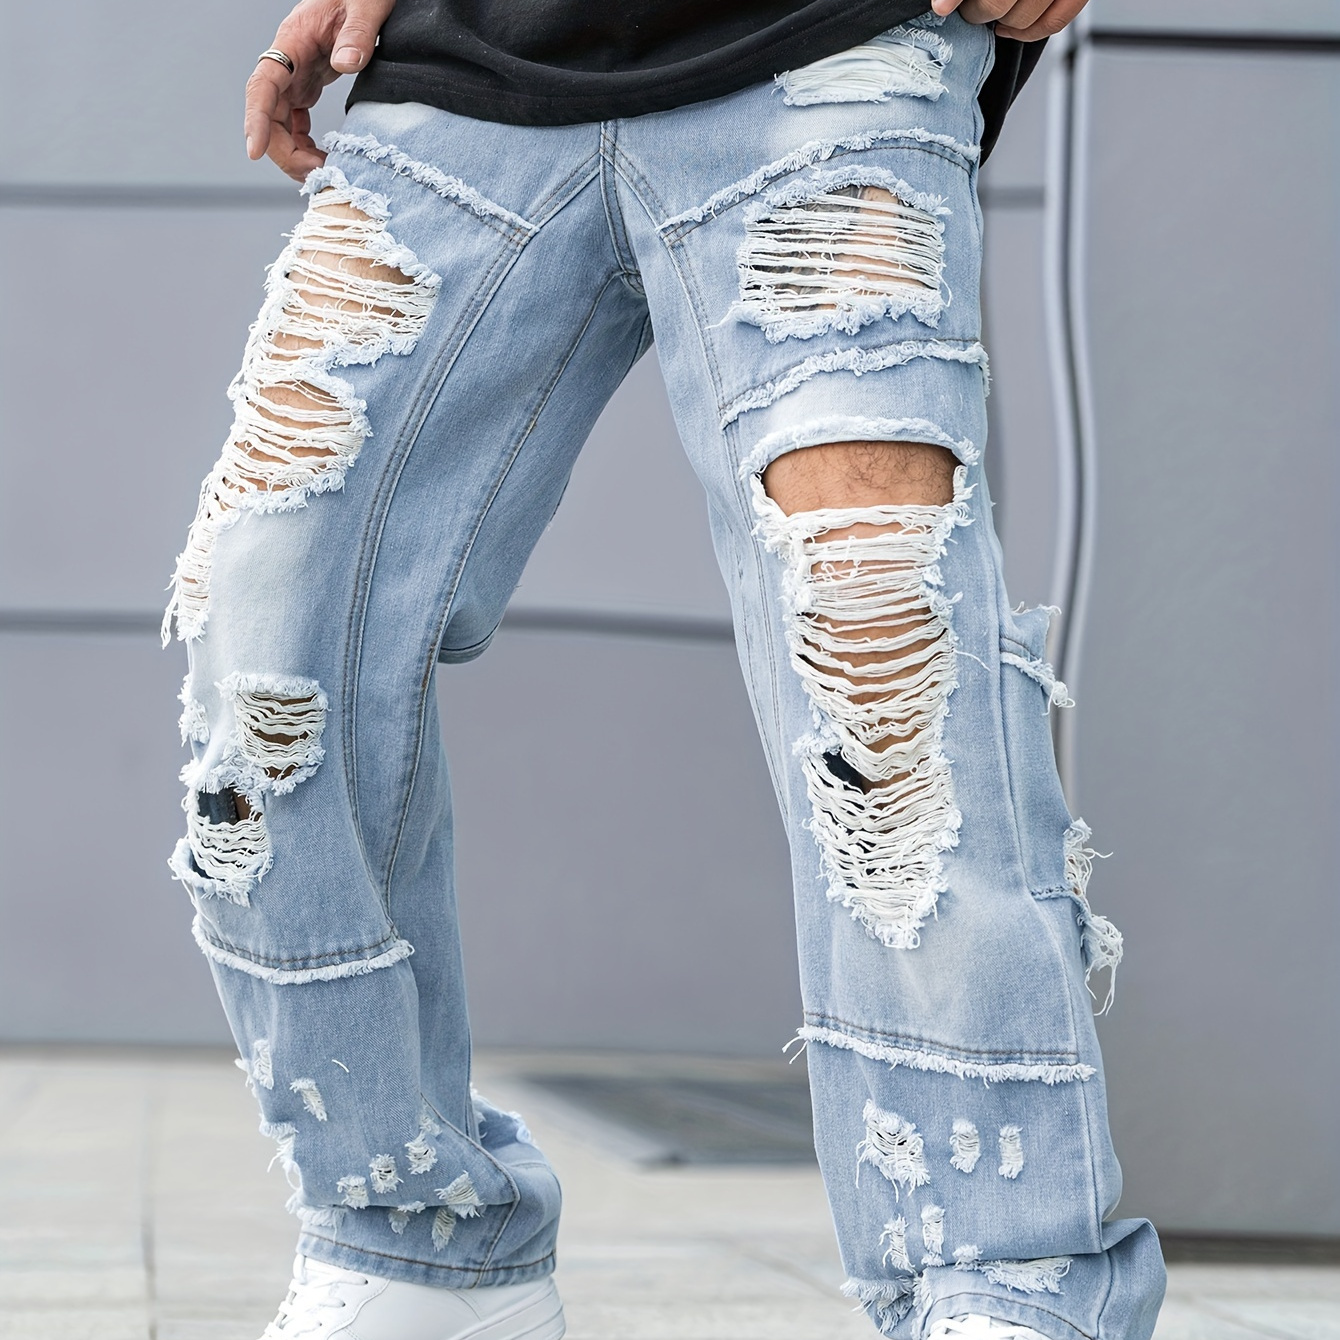 

Men's Cotton Blend Regular Ripped Jeans, Casual Street Style Distressed Denim Pants